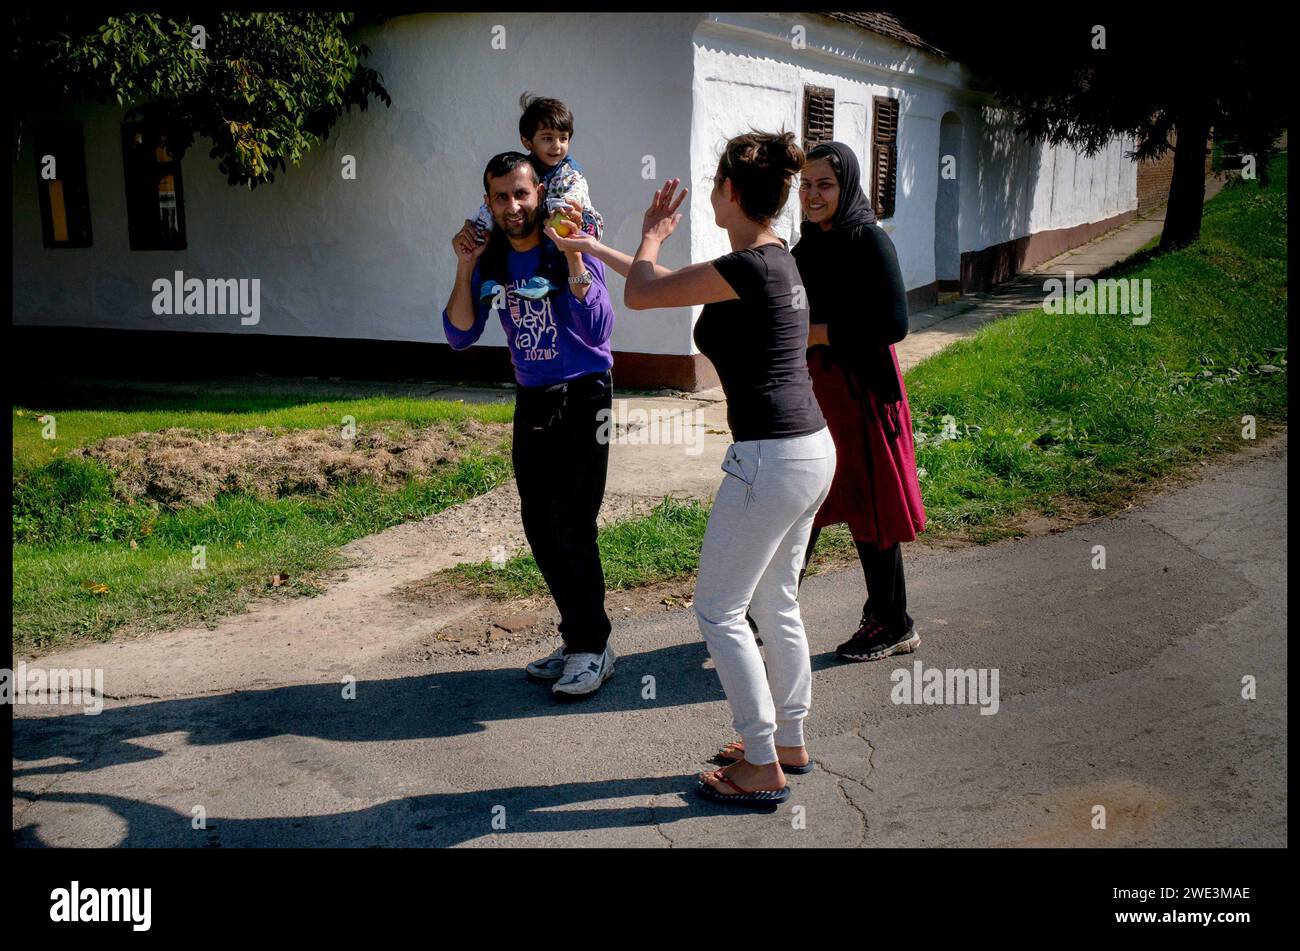 Image ©Licensed to Parsons Media. 22/09/2015.Croatia. Migrants in Croatia. Migrant children.   Croatia. Migrants walking in the village of Bapska, Croatia, after just crossing the Border from Serbia into Croatia as they make their way to Hungary.  Picture by Andrew Parsons / Parsons Media Stock Photo